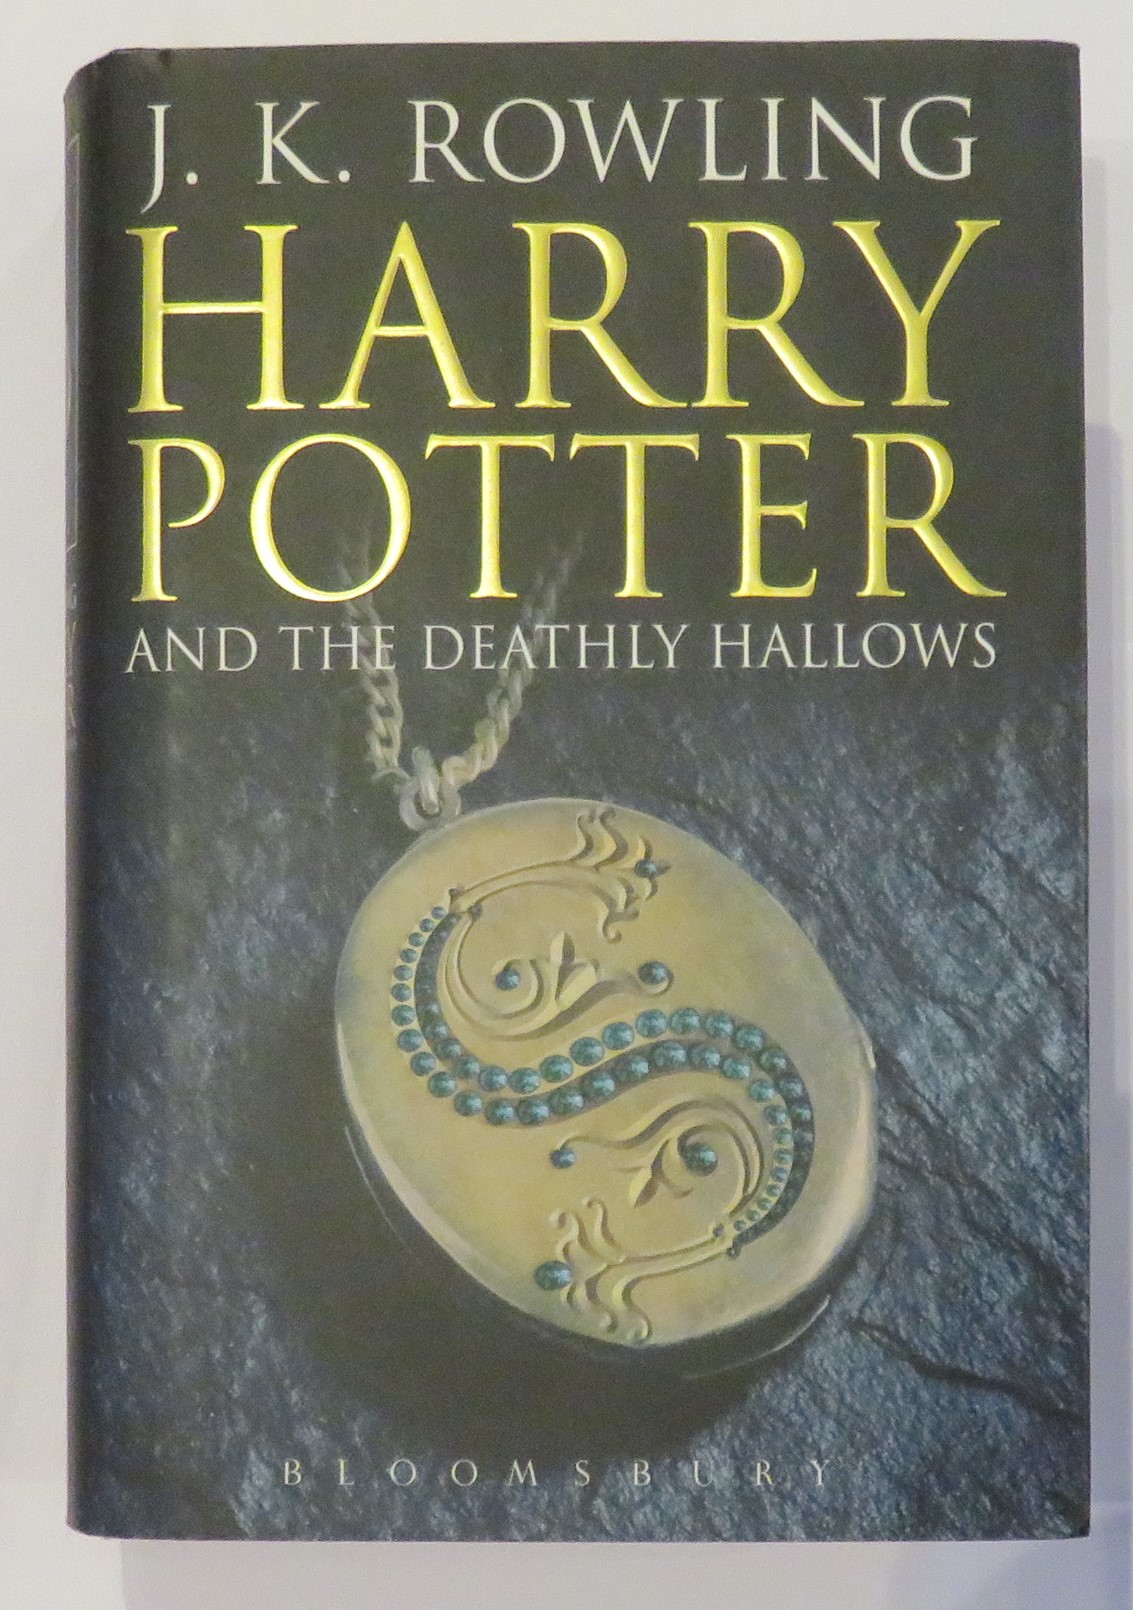 Harry Potter and the Deathly Hallows: First Edition